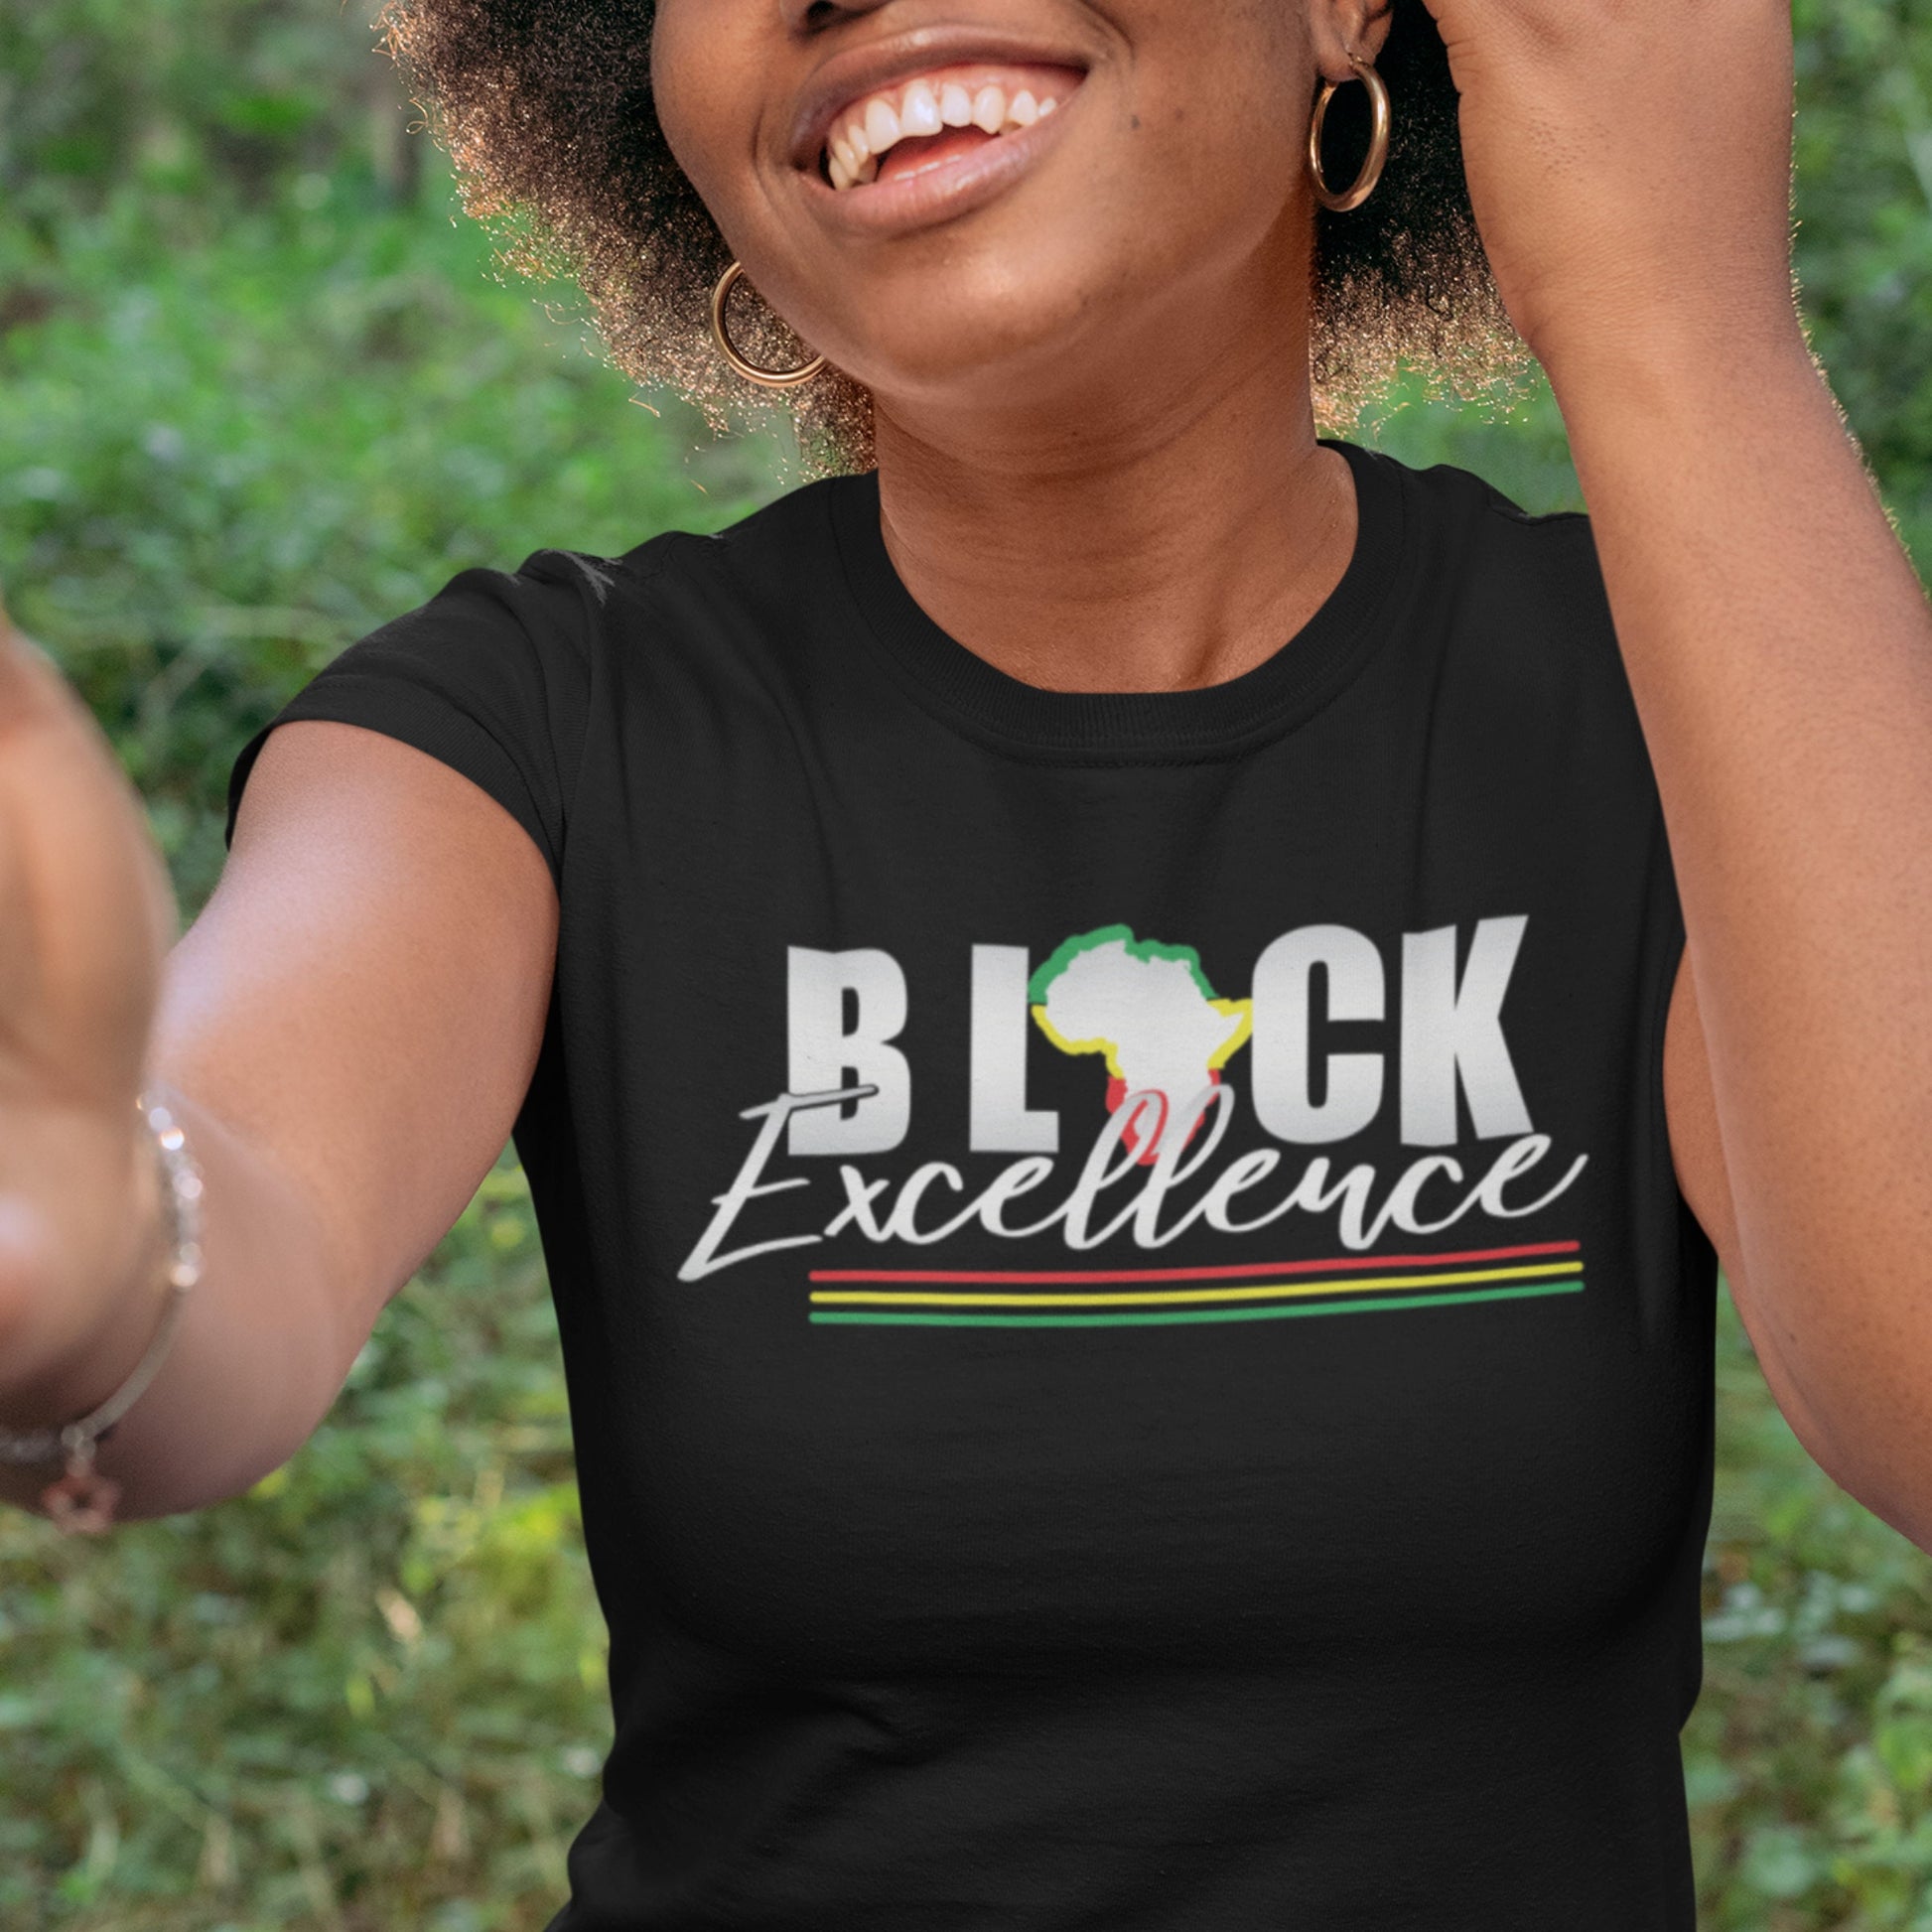 Black Excellence SVG, Black Girl Magic, Black History Month, African American, Melanin, Afro Woman, Cricut Silhouette - SthrngurlCreations